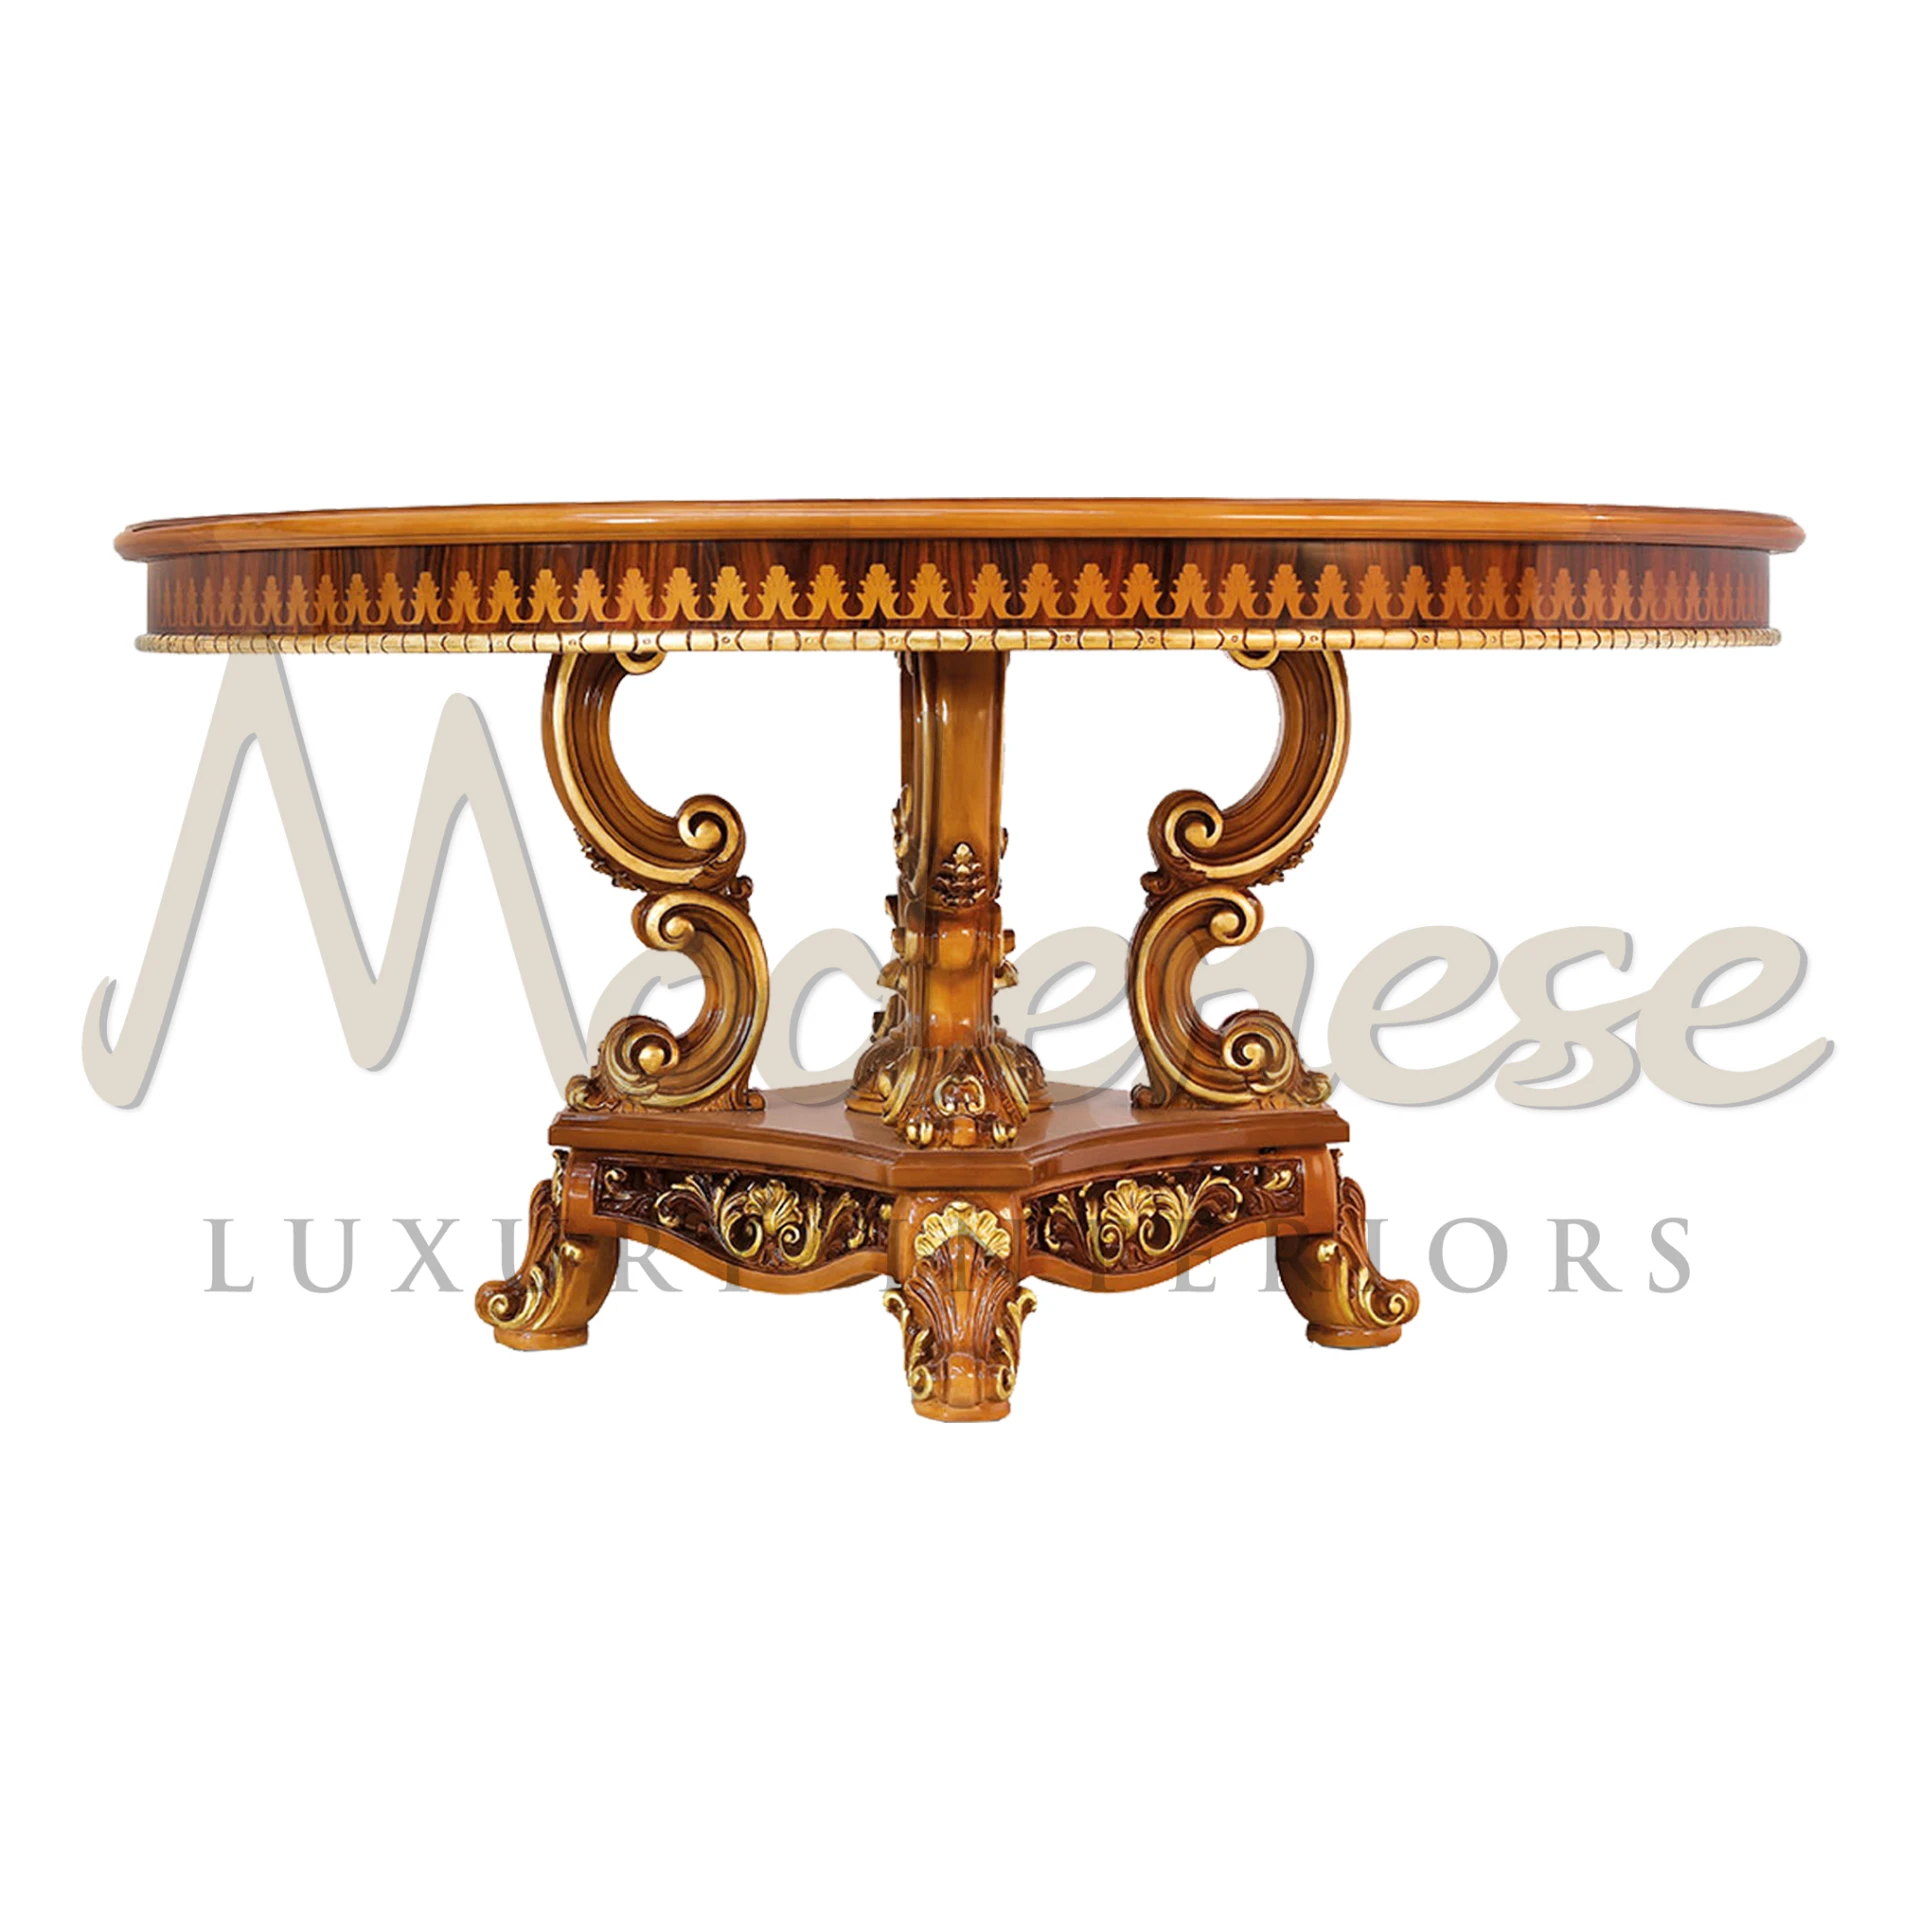 Elegant marquetry round table by Modenese Furniture, embodying timeless luxury and classic Italian design.